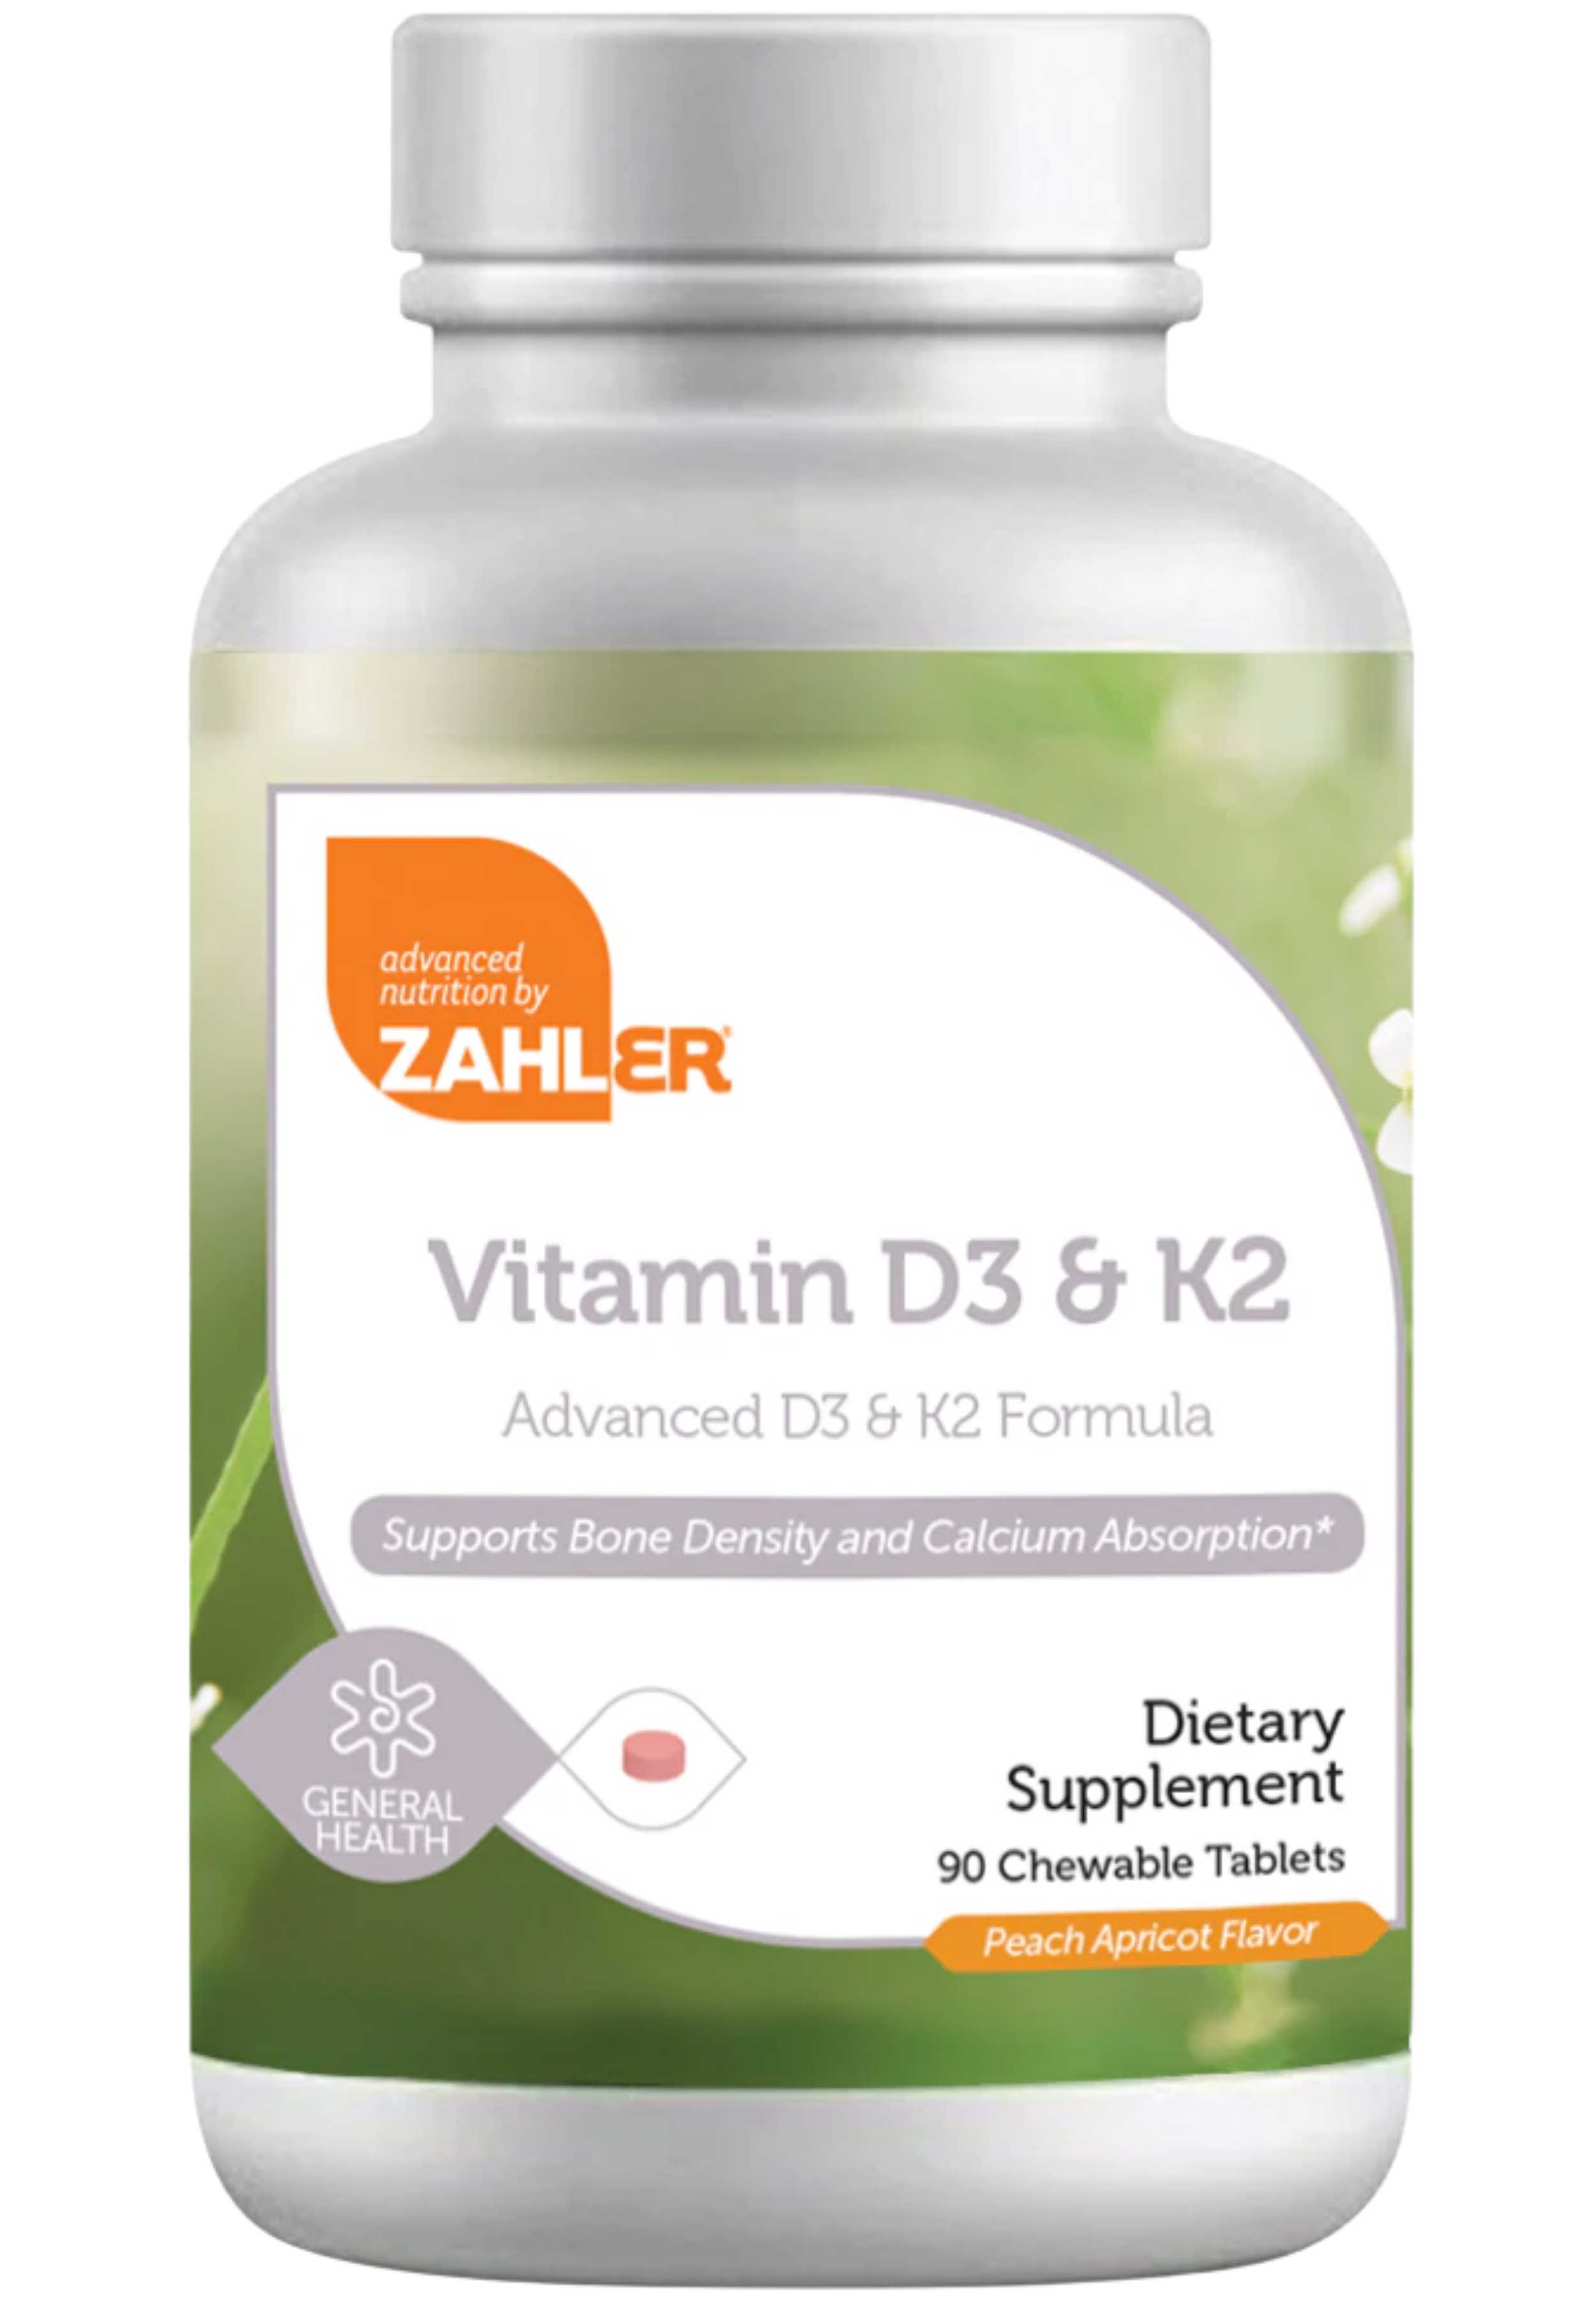 Advanced Nutrition By Zahler Vitamin D3 & K2 Chewable